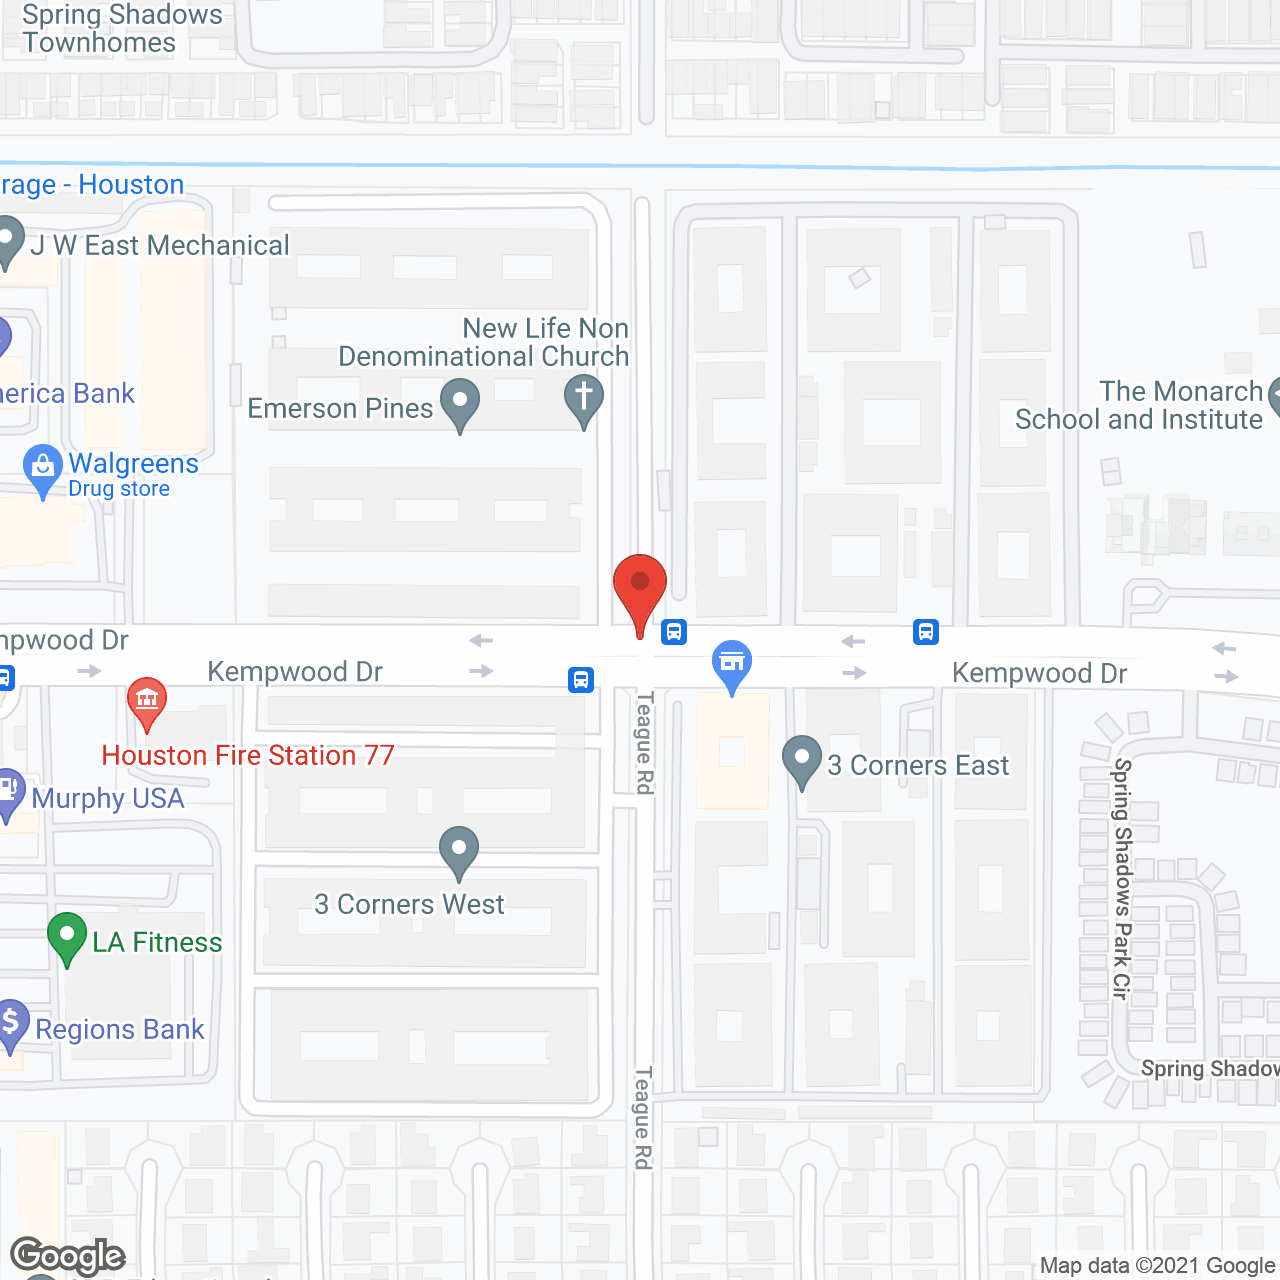 Emerson Pines in google map